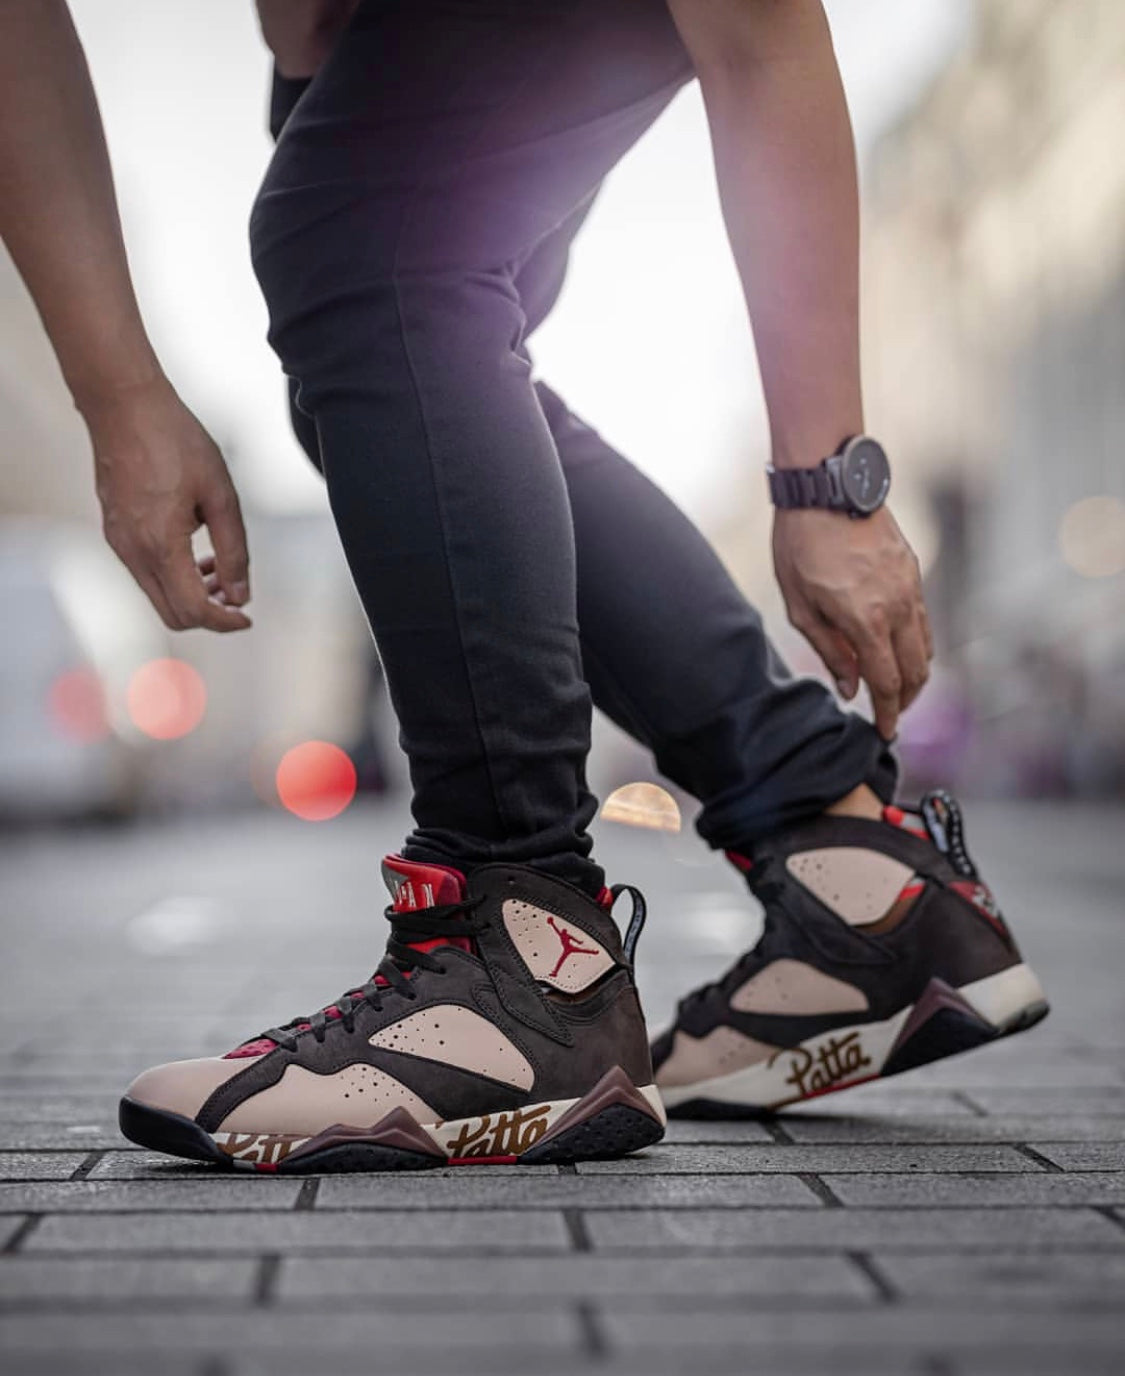 VO -AJ7 PATTA joint black and gray